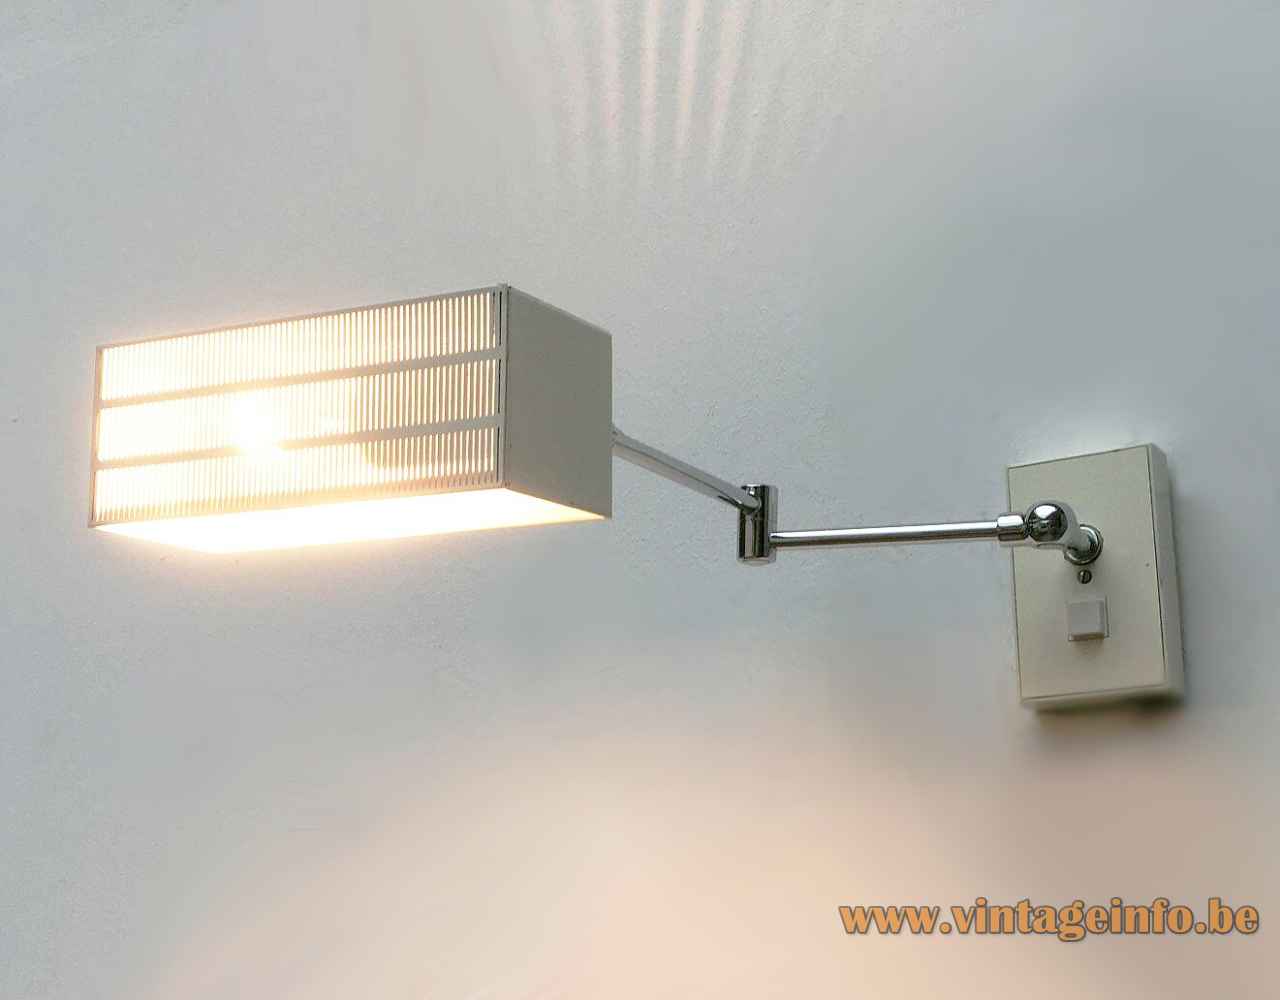 Bünte und Remmler Flamingo wall lamp adjustable chrome rods white rectangular perforated lampshade 1960s BuR Germany